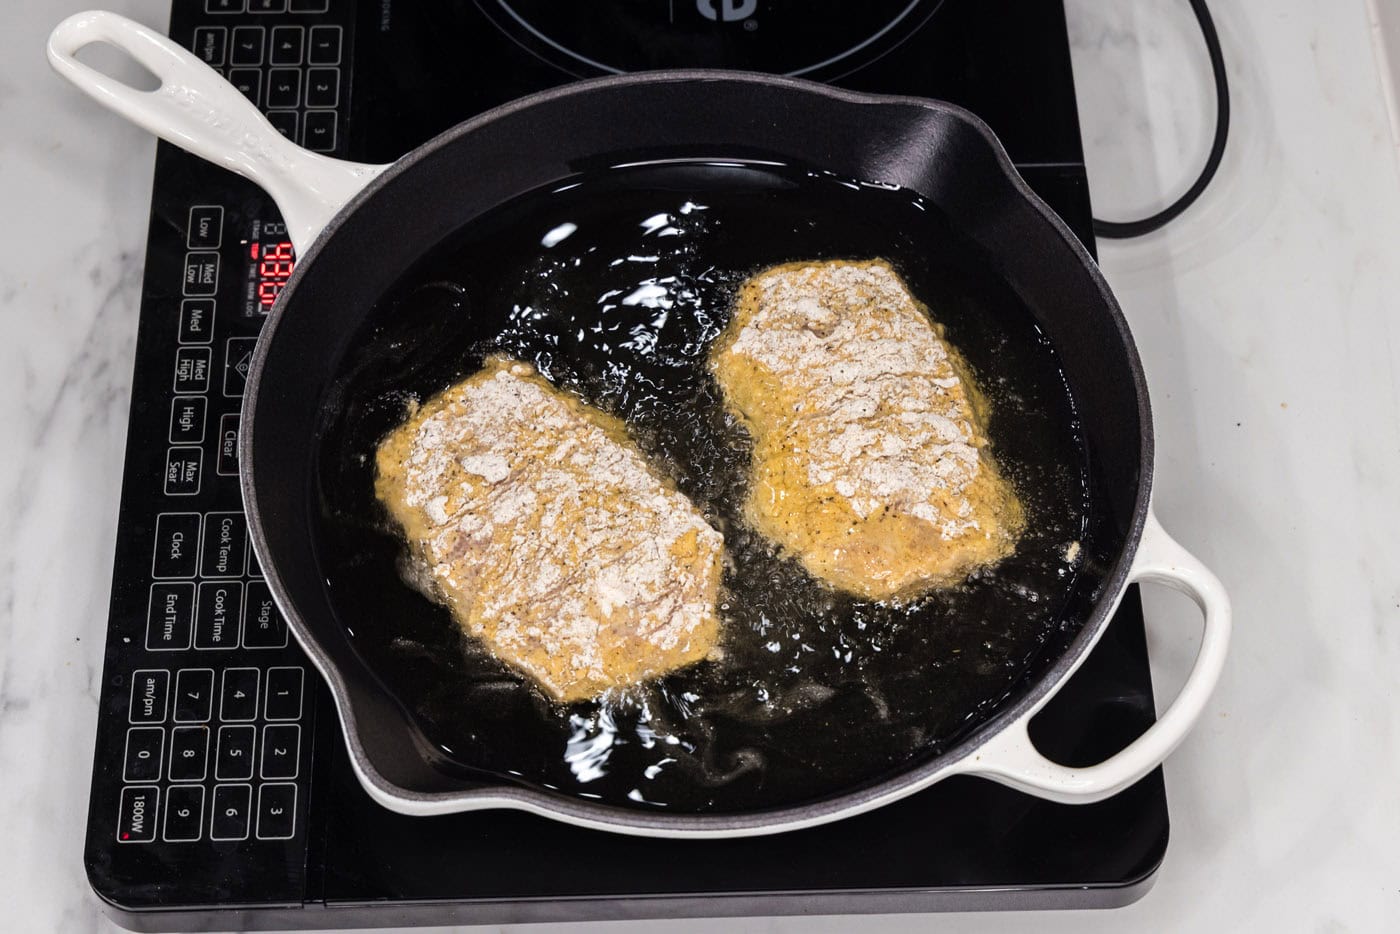 frying chicken burgers over hot oil in a skillet